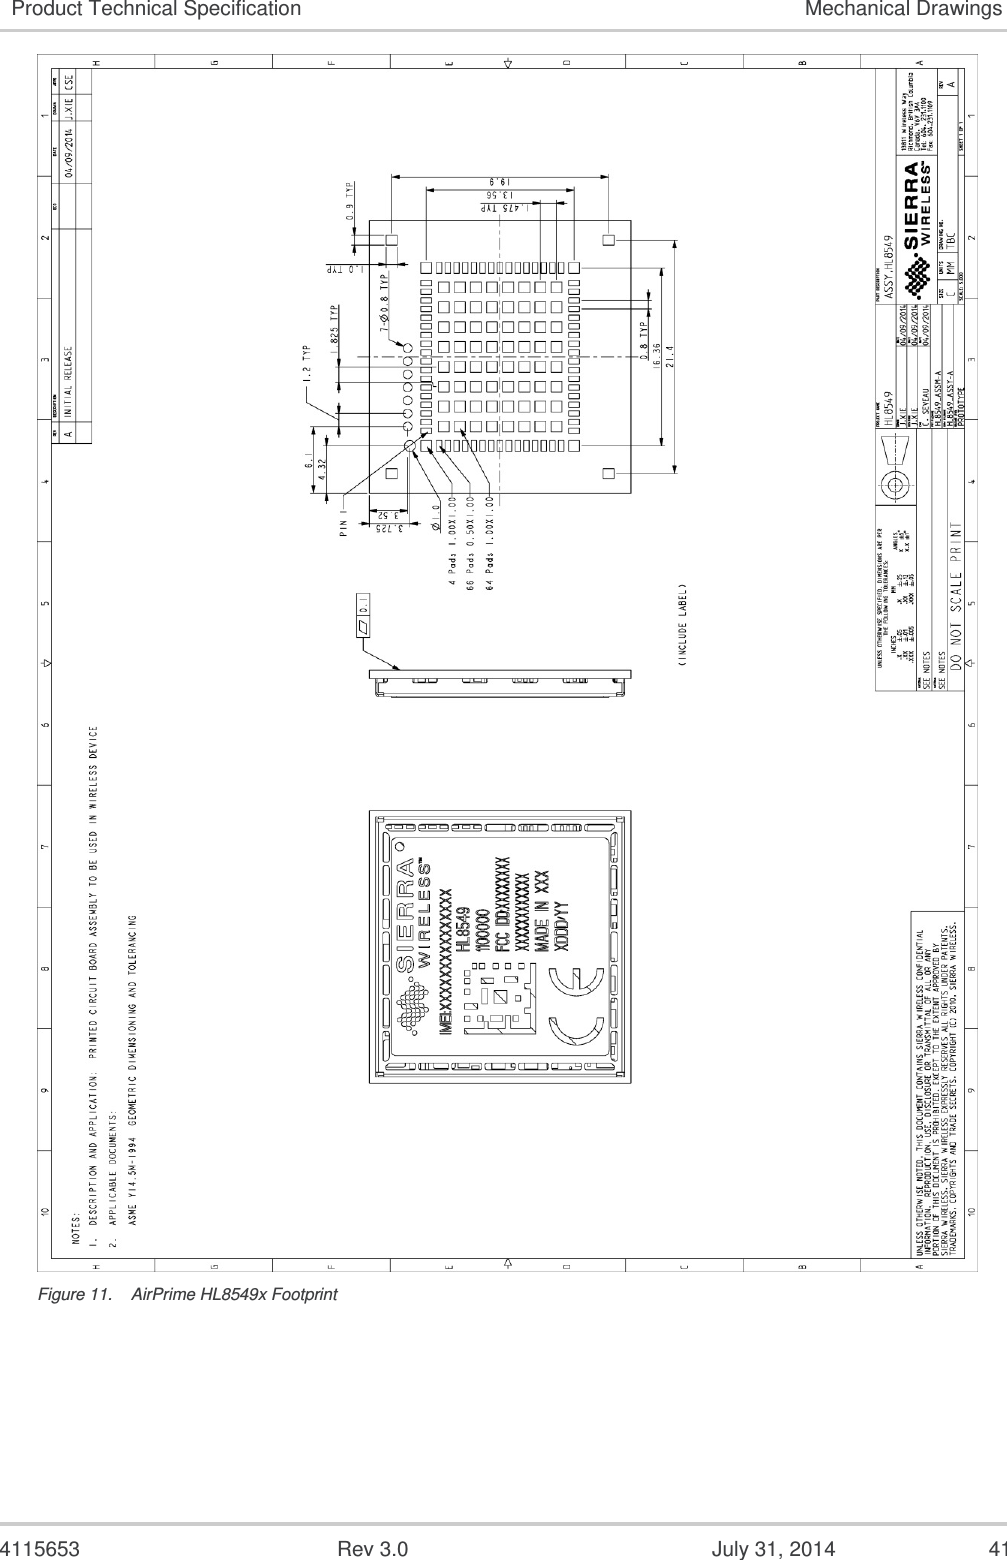  4115653  Rev 3.0  July 31, 2014  41 Product Technical Specification Mechanical Drawings  Figure 11.  AirPrime HL8549x Footprint 